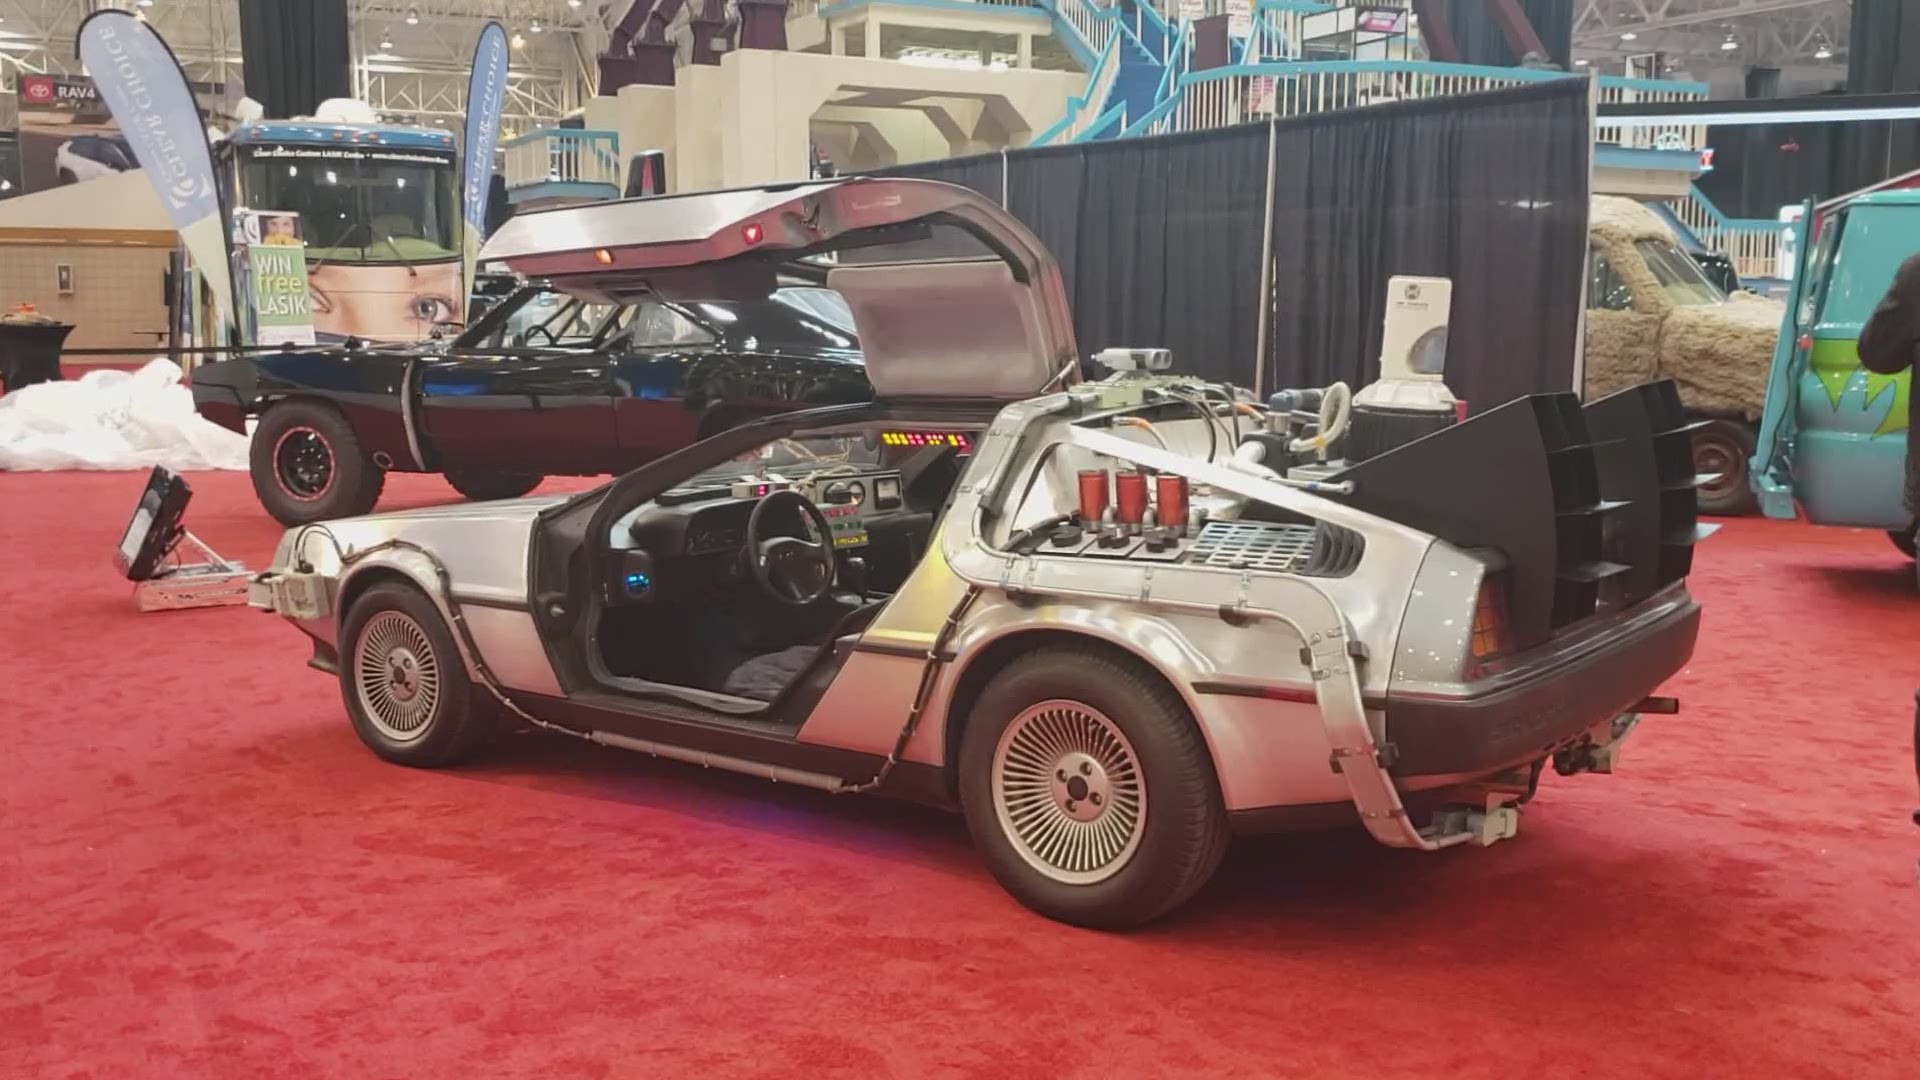 'Back to the Future' fans, rejoice! We got an up-close look at this famous DeLoreon, which is on display at the 2019 Cleveland Auto Show.